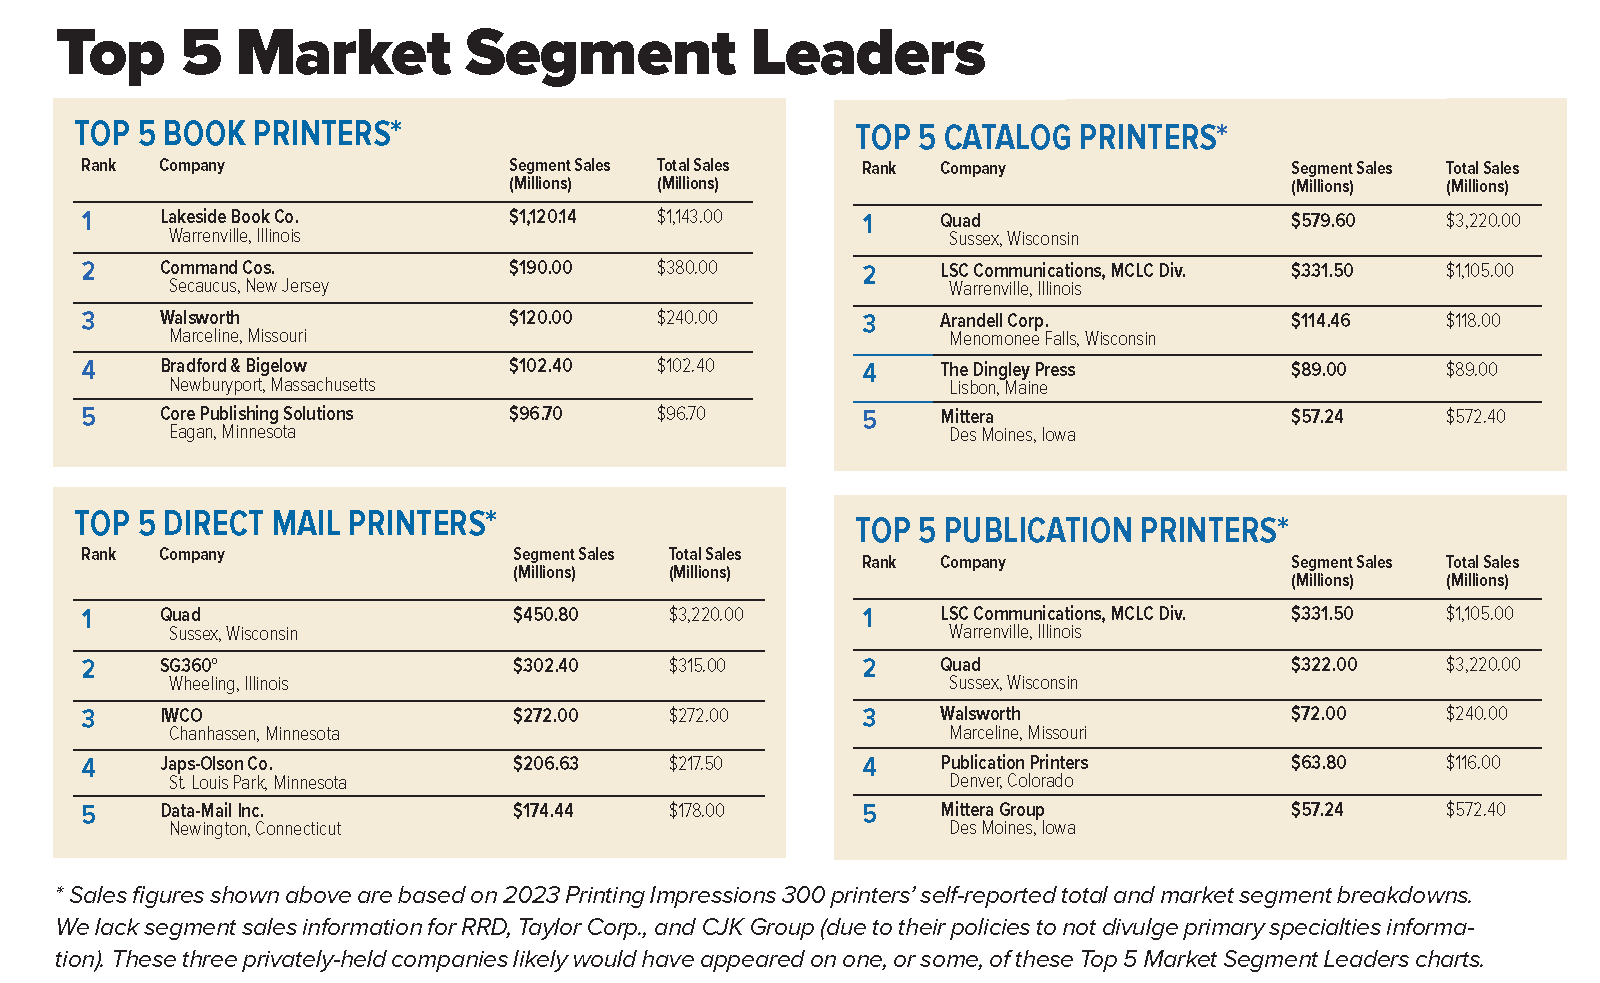 Figure 1: The Top 5 Book, Direct Mail, Publication, and Catalog Segment Leaders